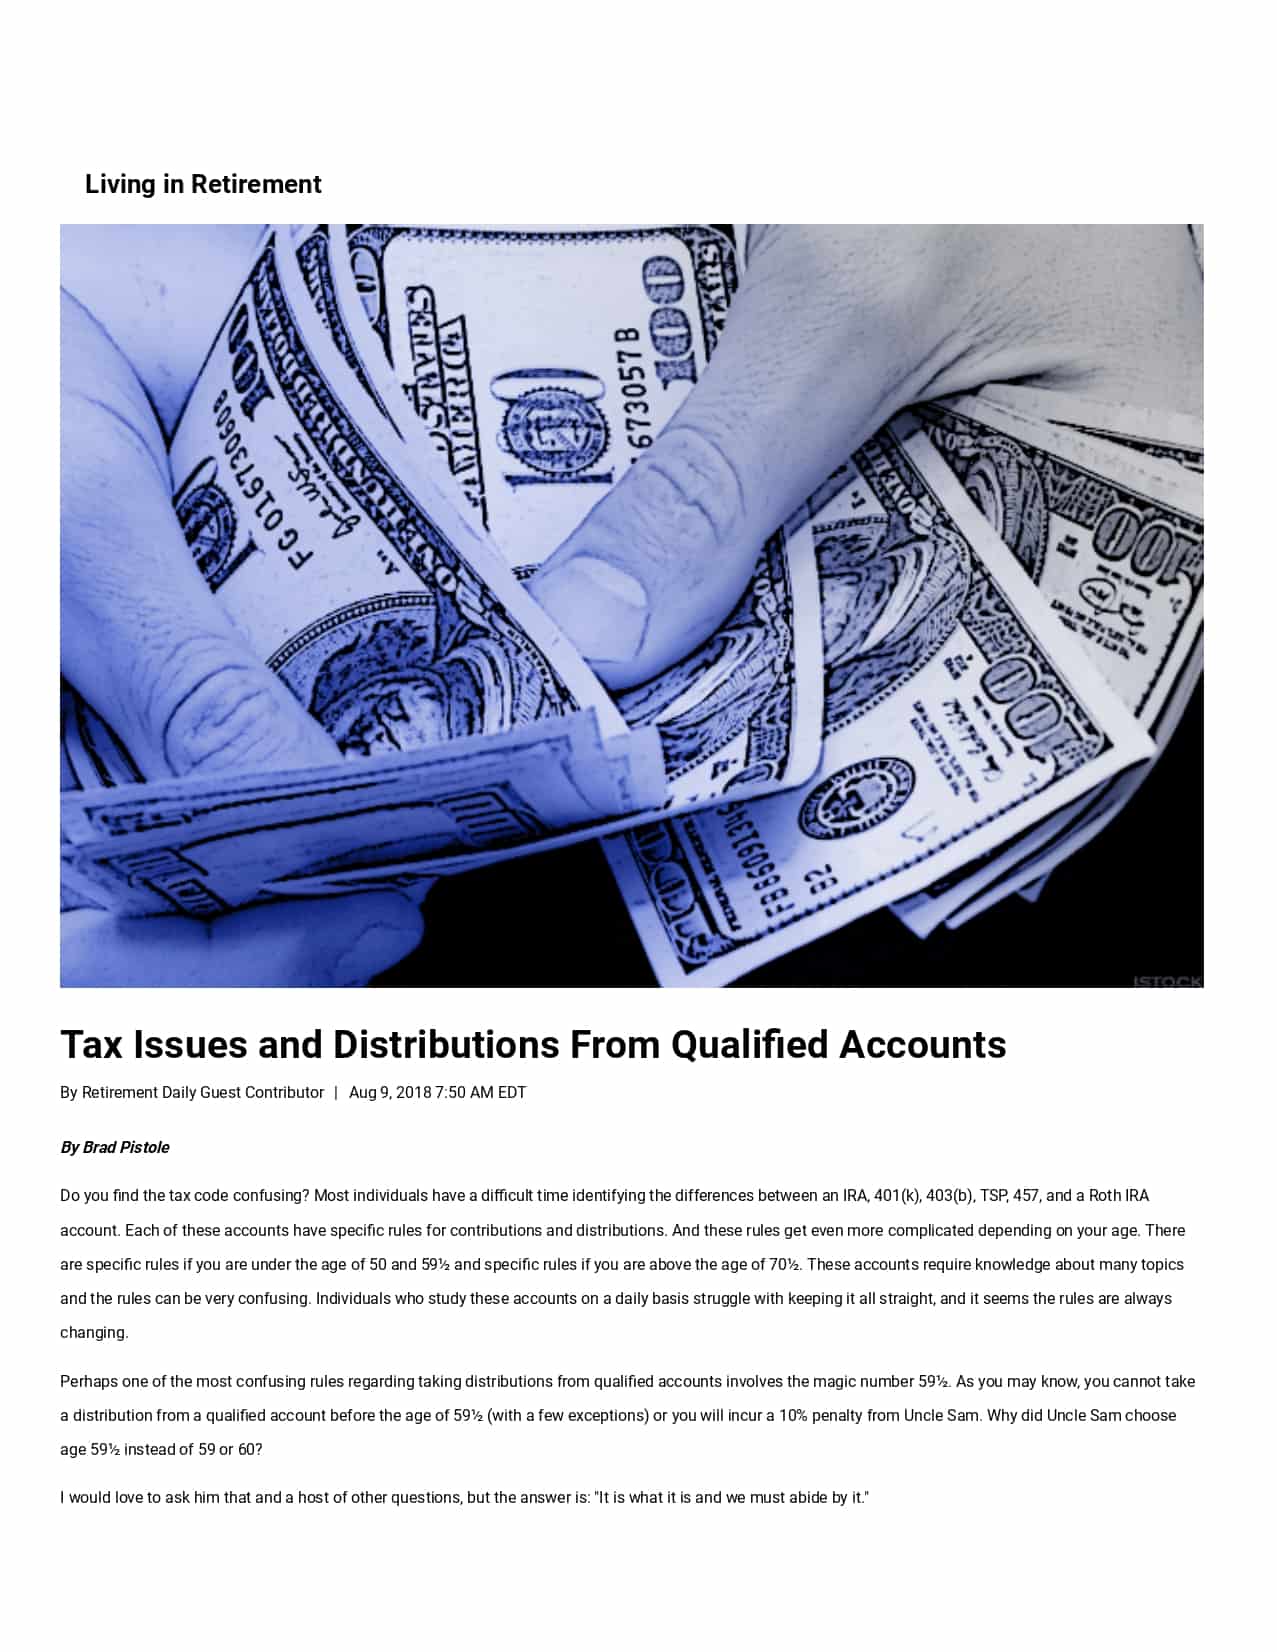 Tax Issues and Distributions from Qualified Accounts